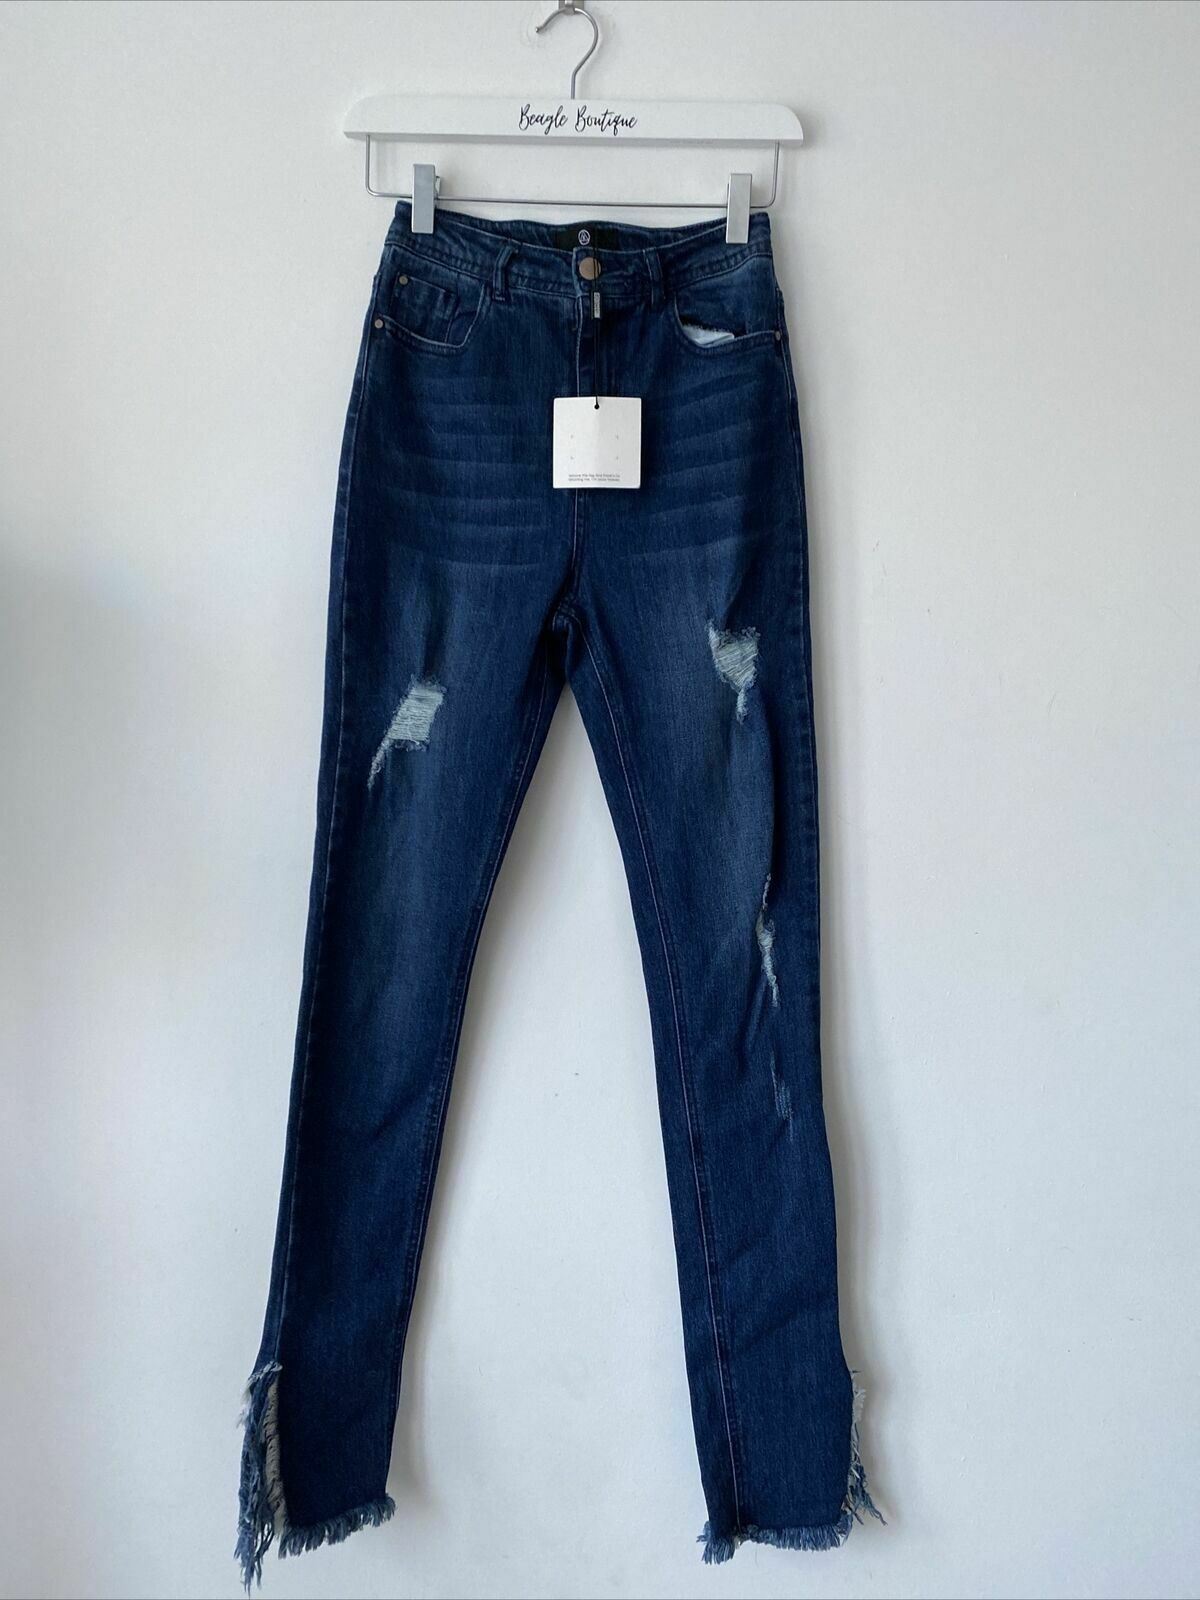 Missguided SINNER High Waisted Ripped Skinny Blue Jeans Size 8L W26 Frayed Hems